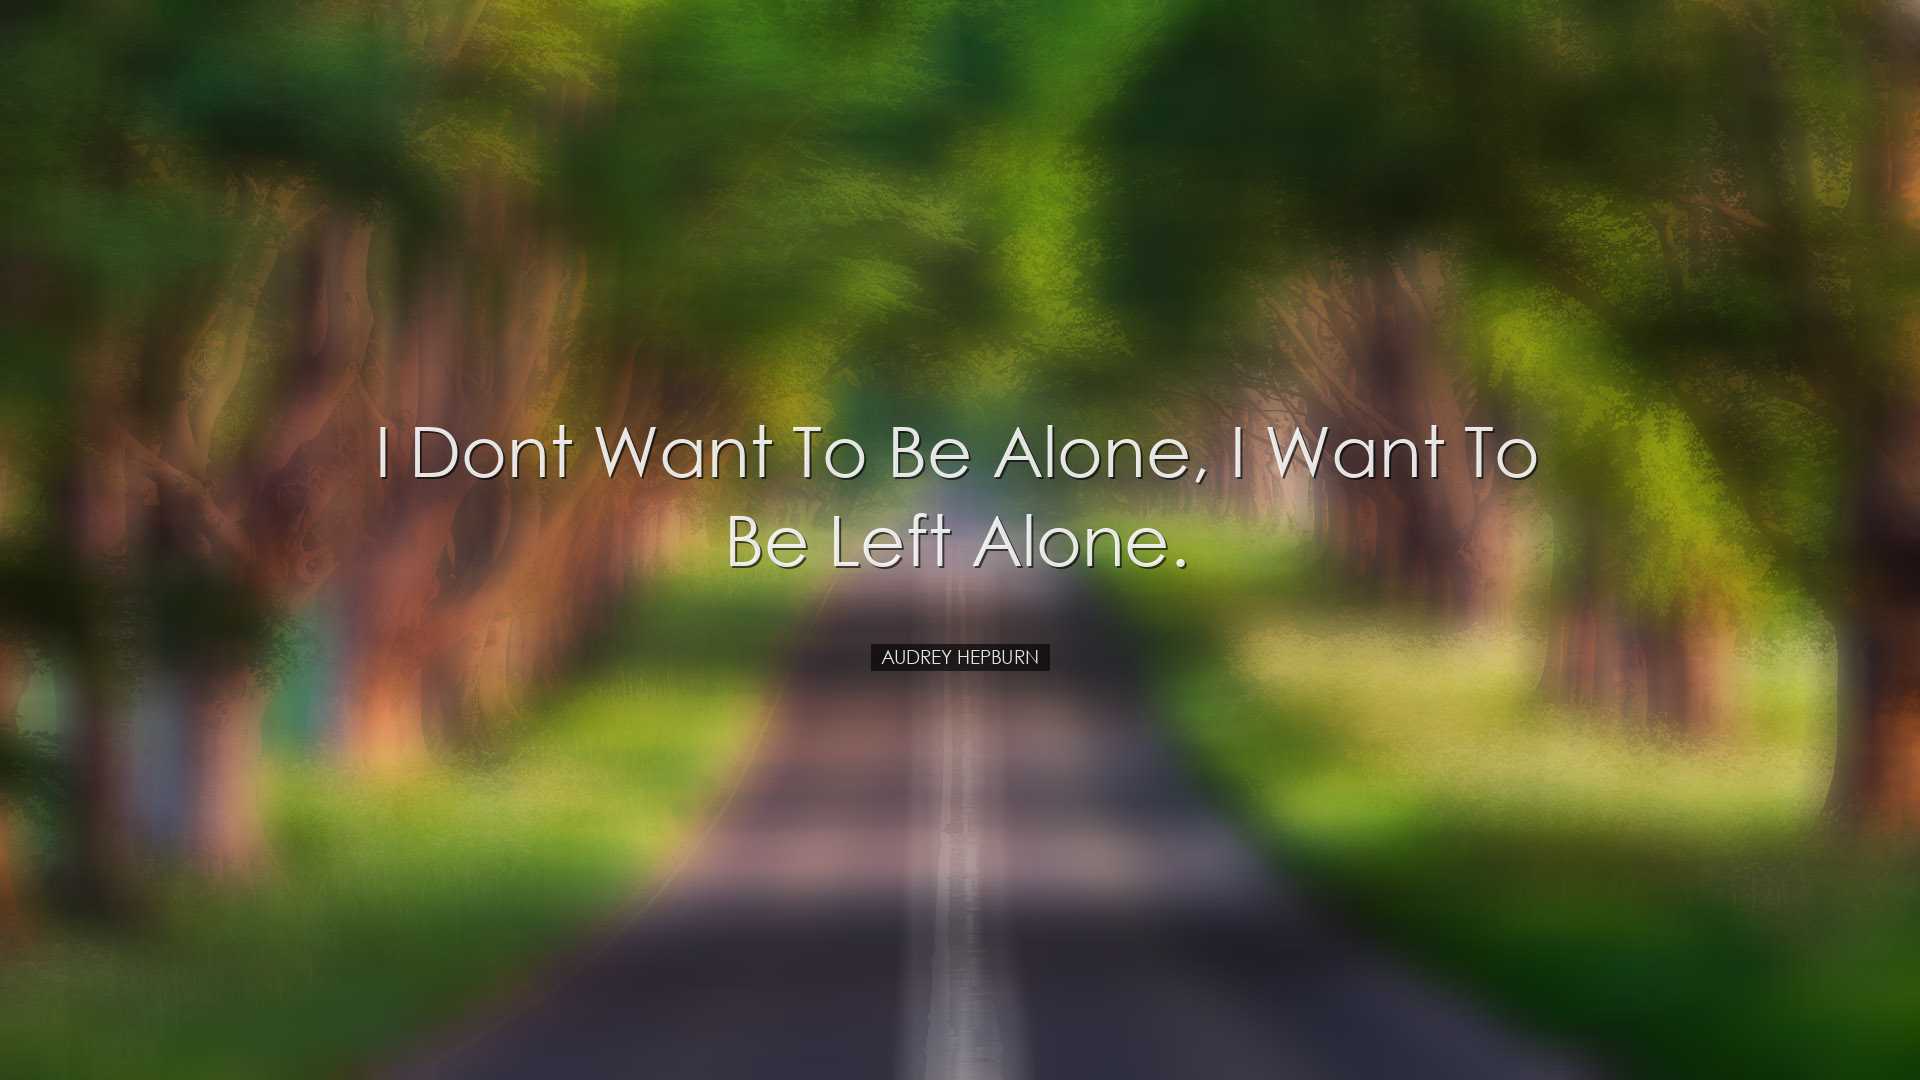 I dont want to be alone, I want to be left alone. - Audrey Hepburn